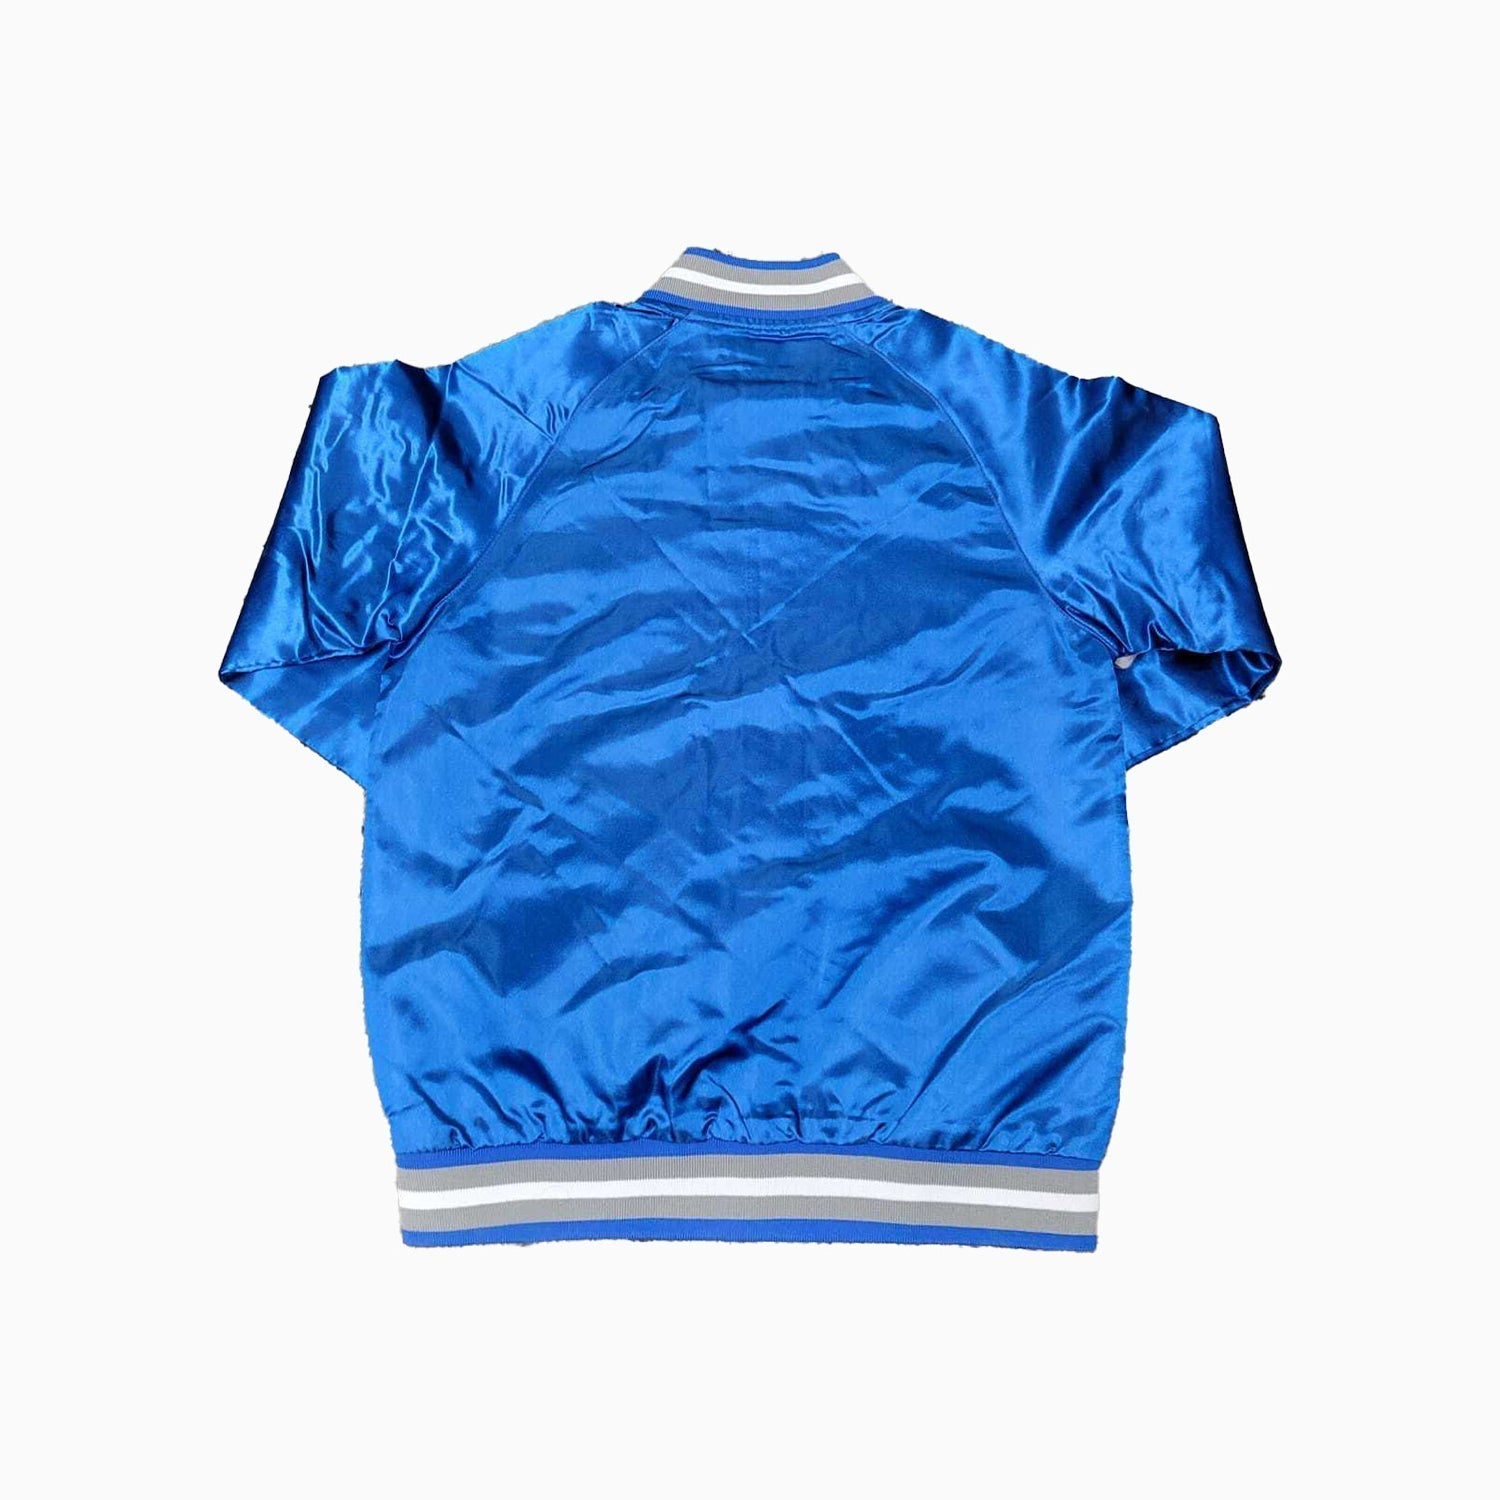 Mitchell And Ness Detroit Lions NFL Lightweight Satin Jacket Youth - Color: Blue - Kids Premium Clothing -